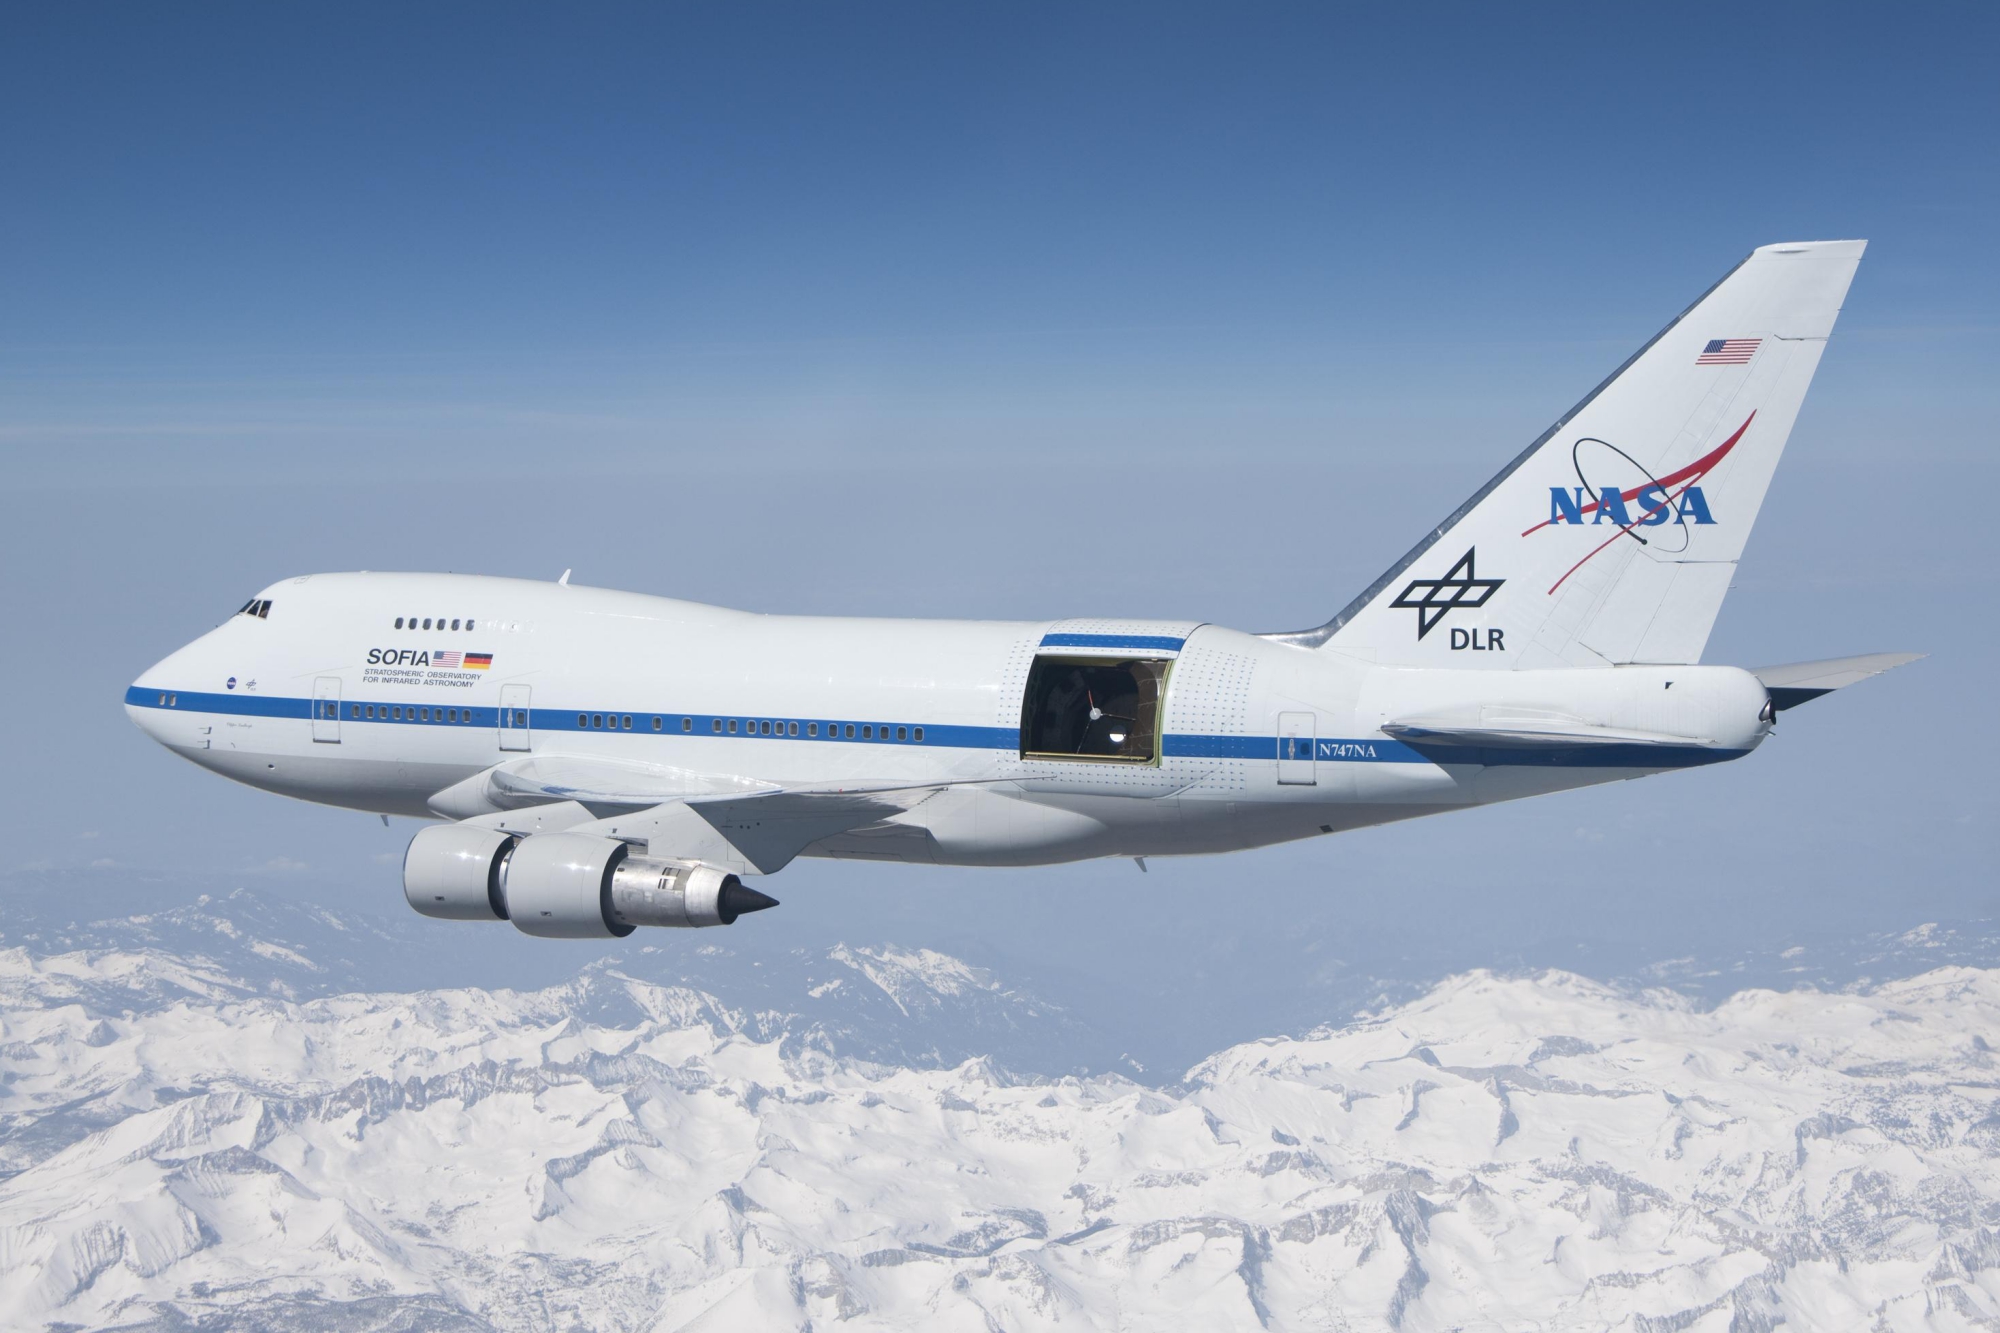 The SOFIA device is a Boeing 747SP aircraft, modified by Raytheon Aircraft Integration Services, which mounted a 2.5-meter reflective telescope on this aircraft.